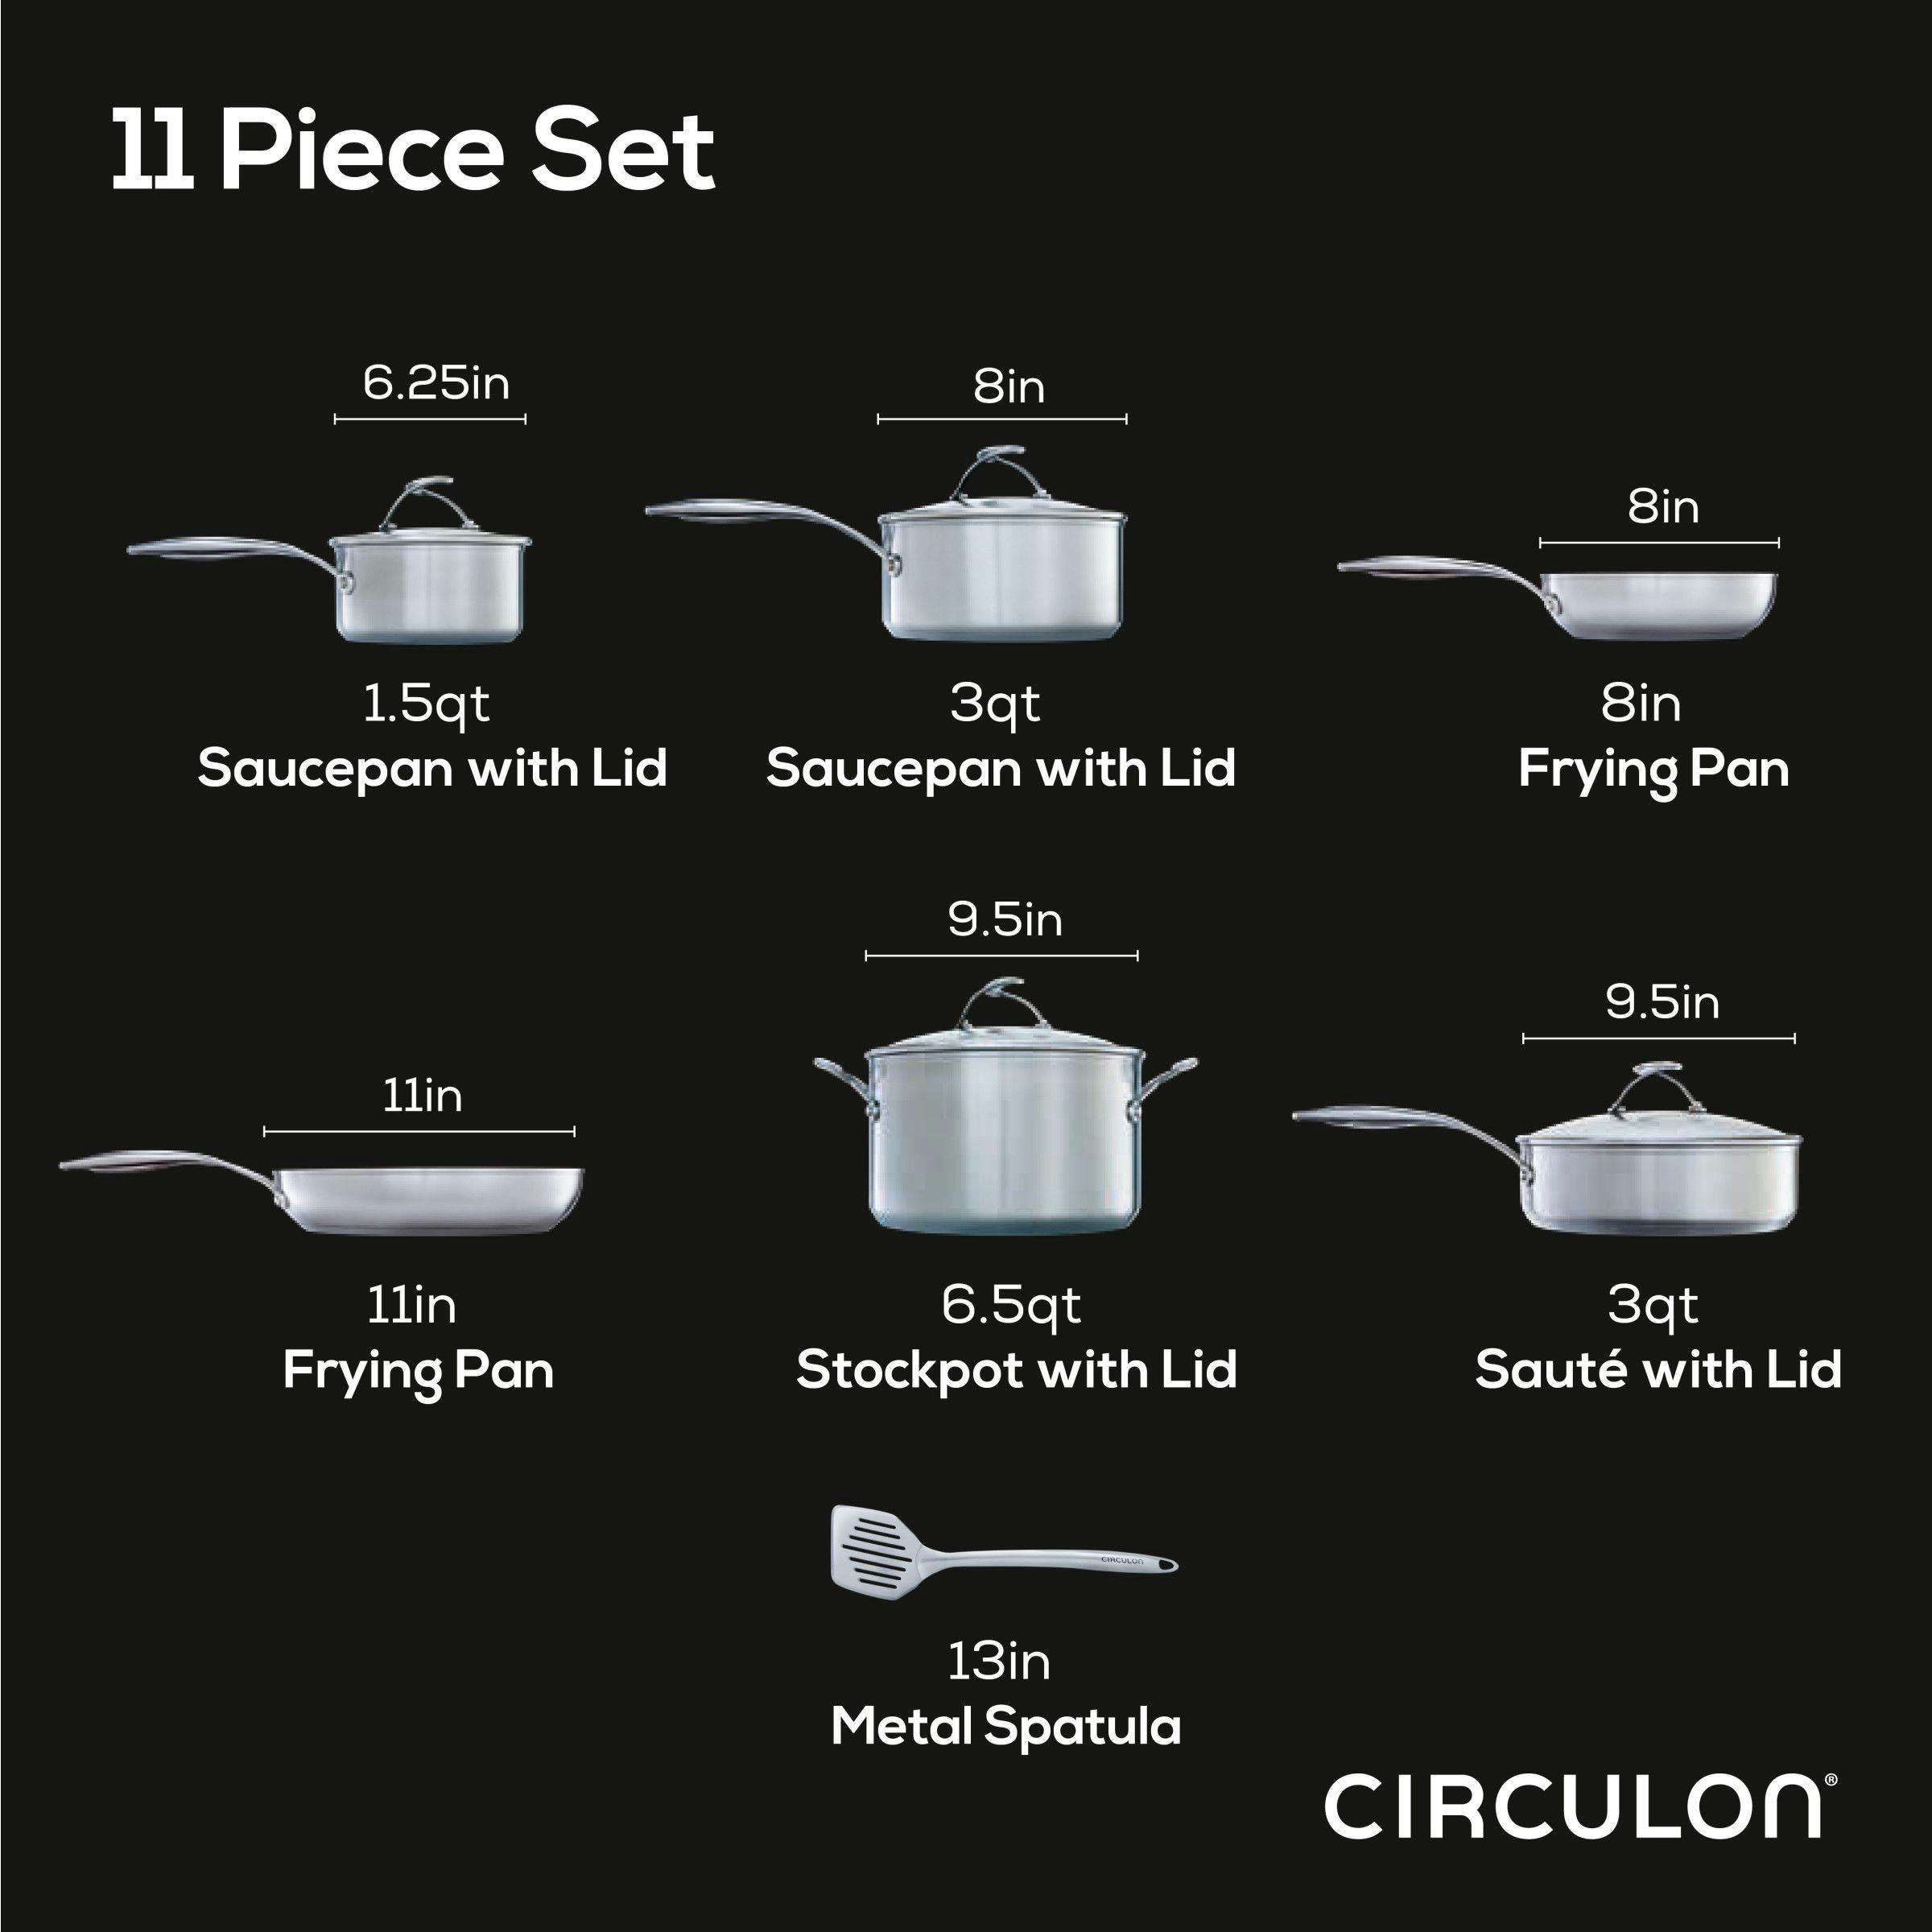 Circulon Stainless Steel Induction Cookware Set with SteelShield Hybrid Stainless and Nonstick Technology, 11-piece, Silver